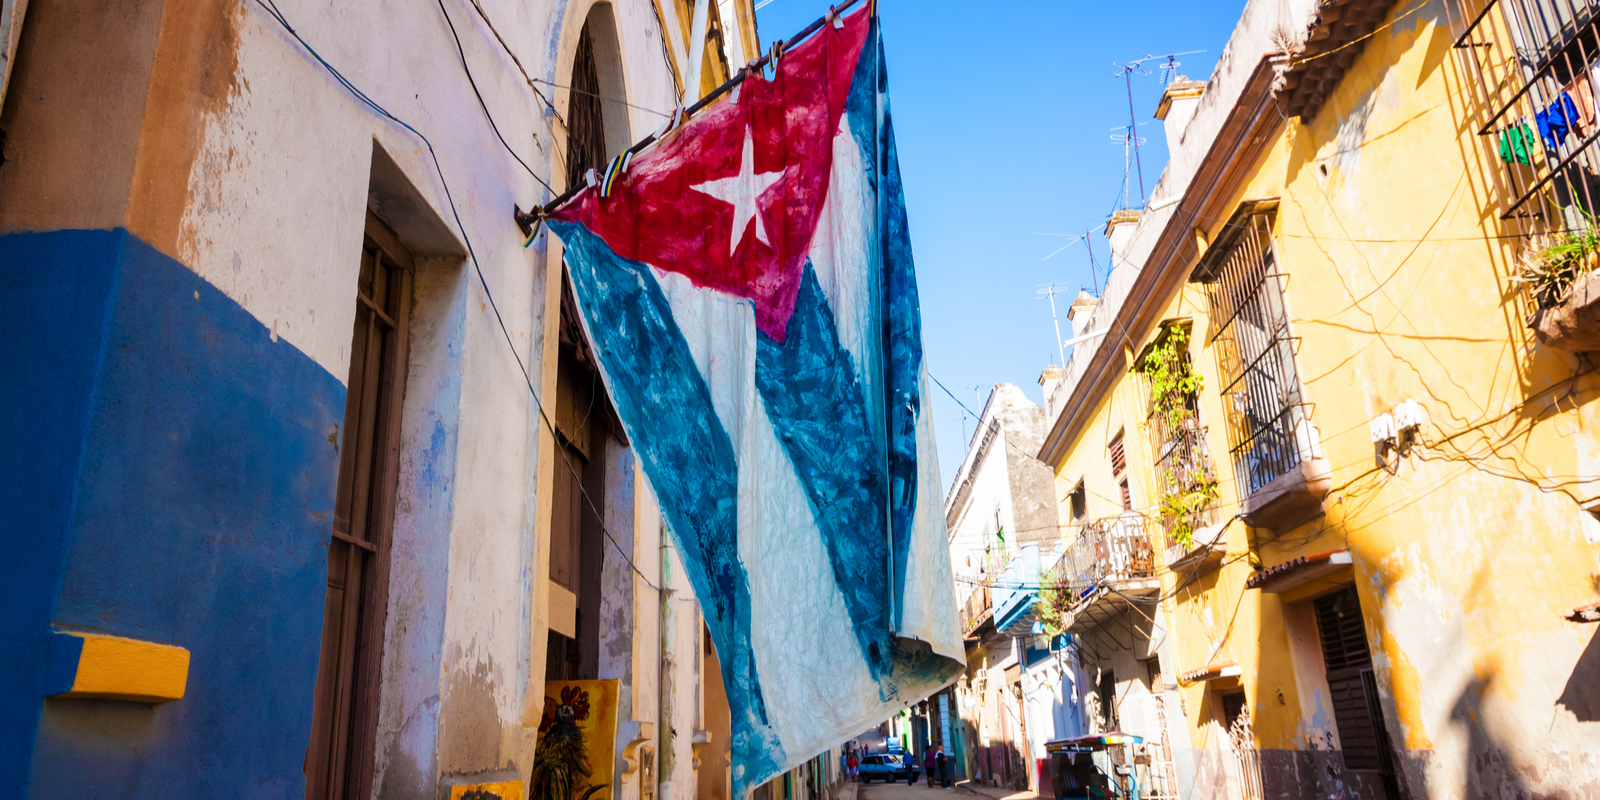 A History of Violent Intervention: John McAfee to Help Cuba Resist US Sanctions With Crypto